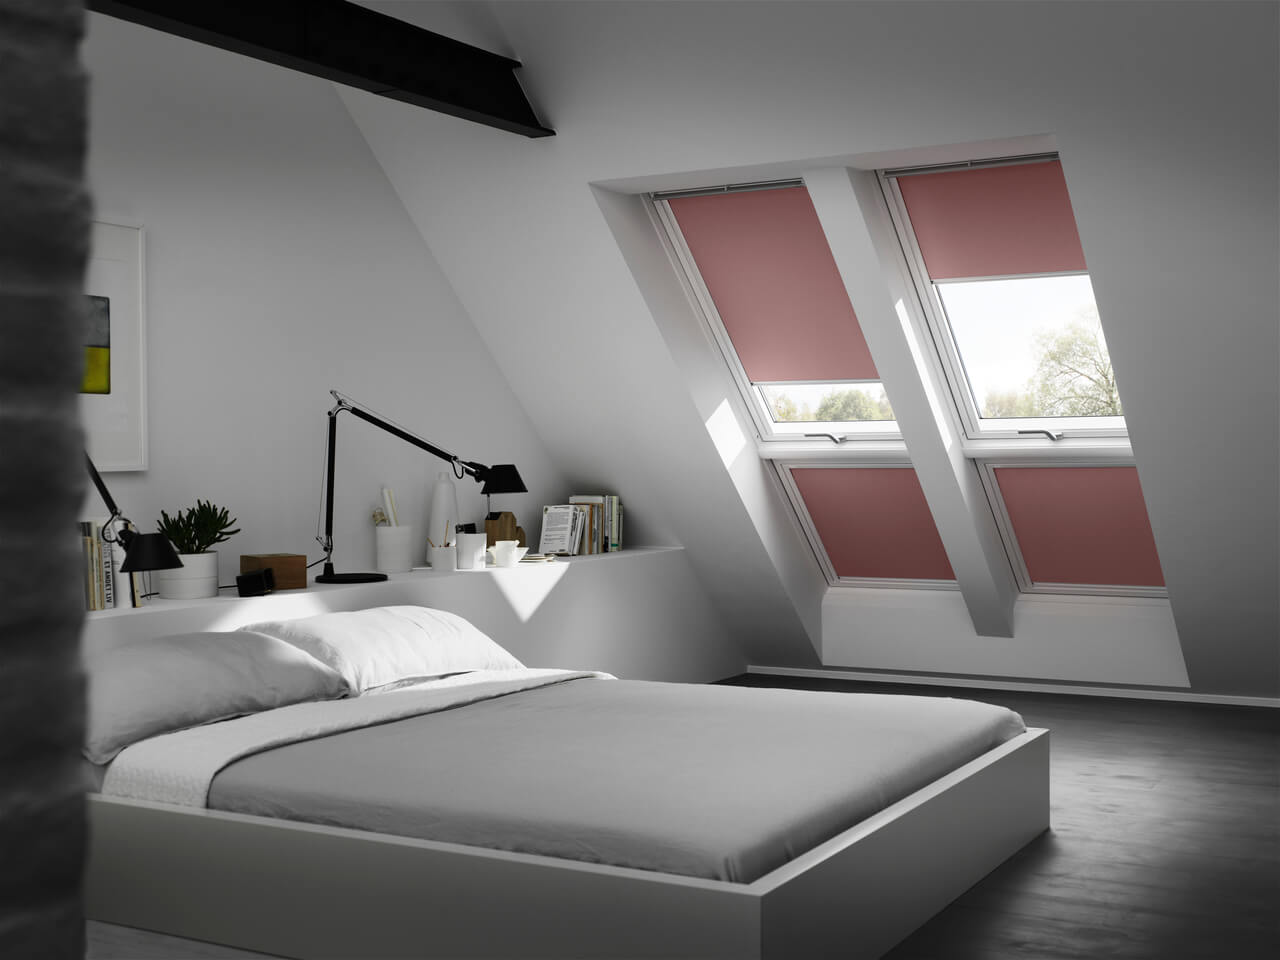 Bedroom image with pink VELUX blackout blinds installed in 4 windows.